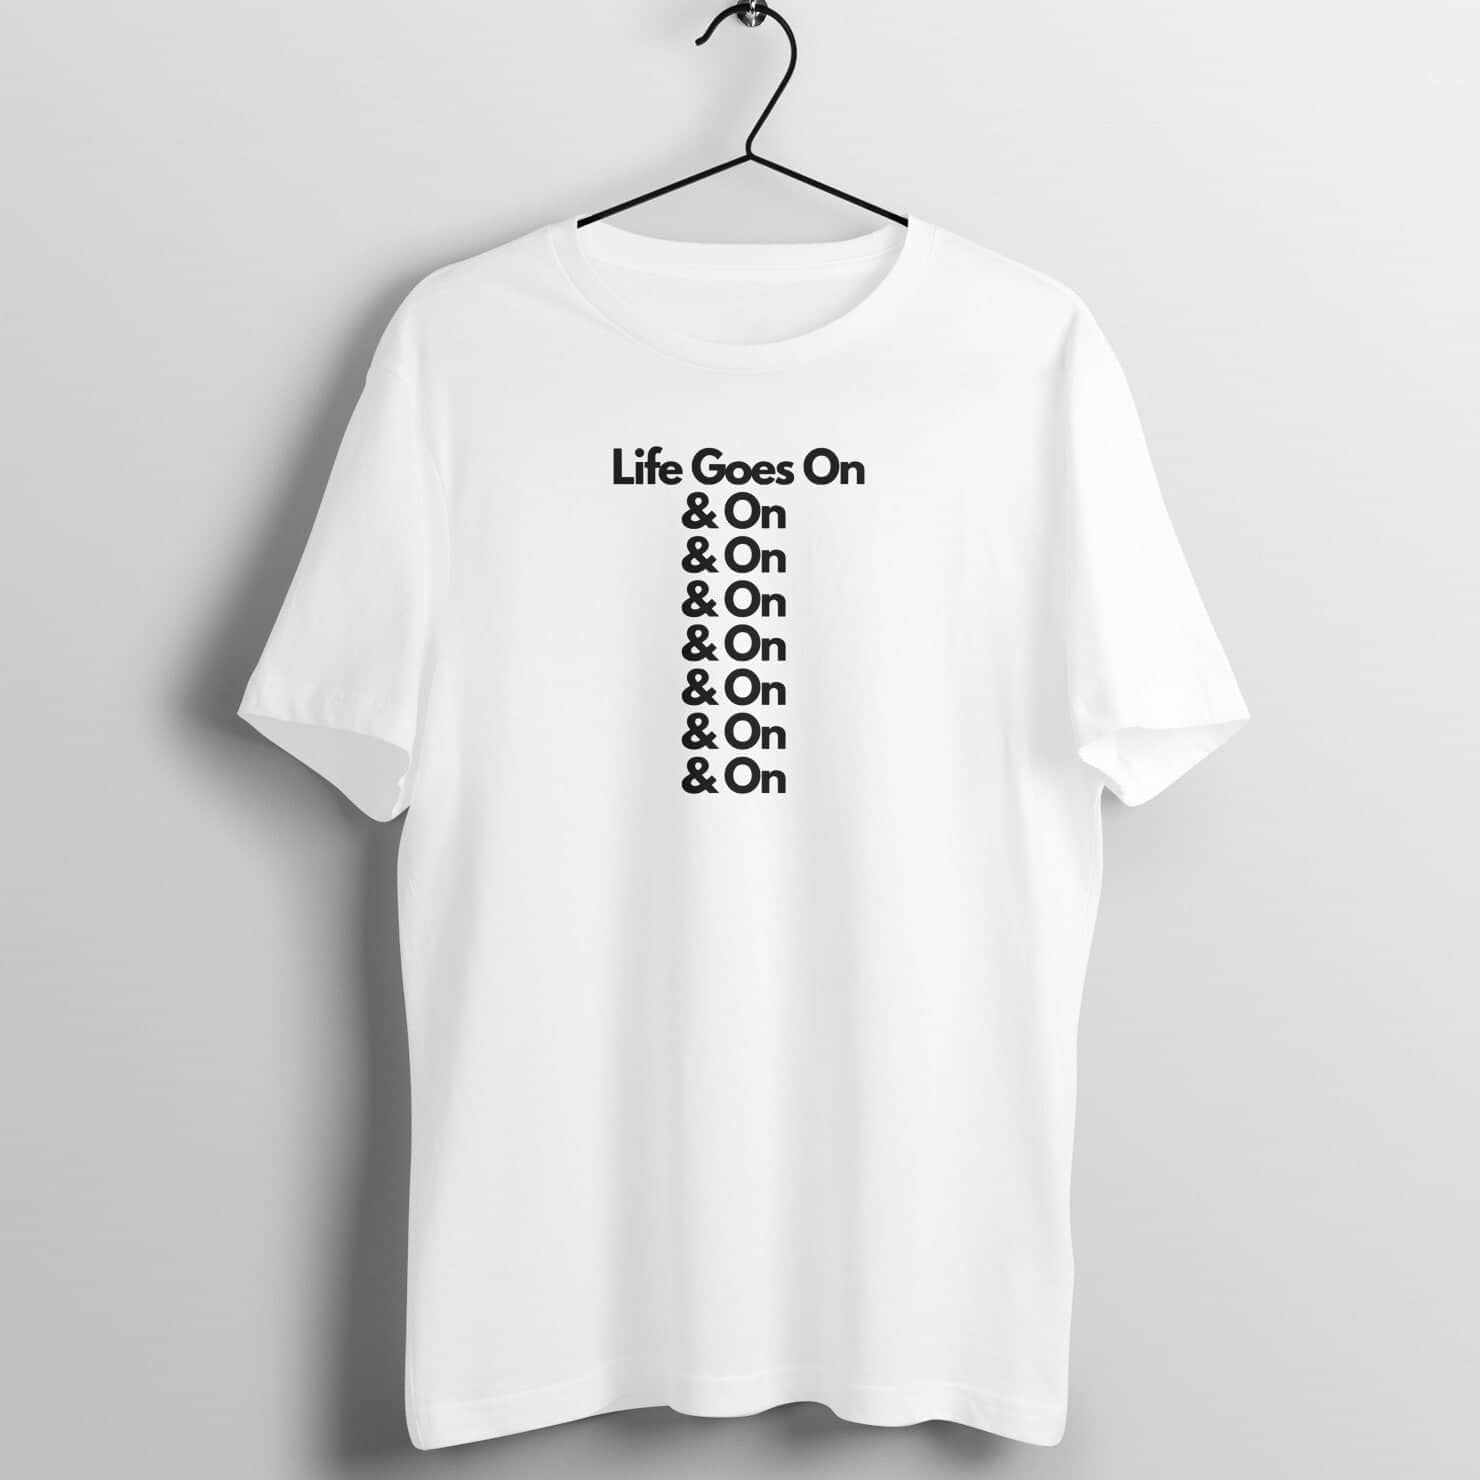 Life Goes On & On & On & On & On Special White Song Lyrics T Shirt for Men and Women freeshipping - Catch My Drift India